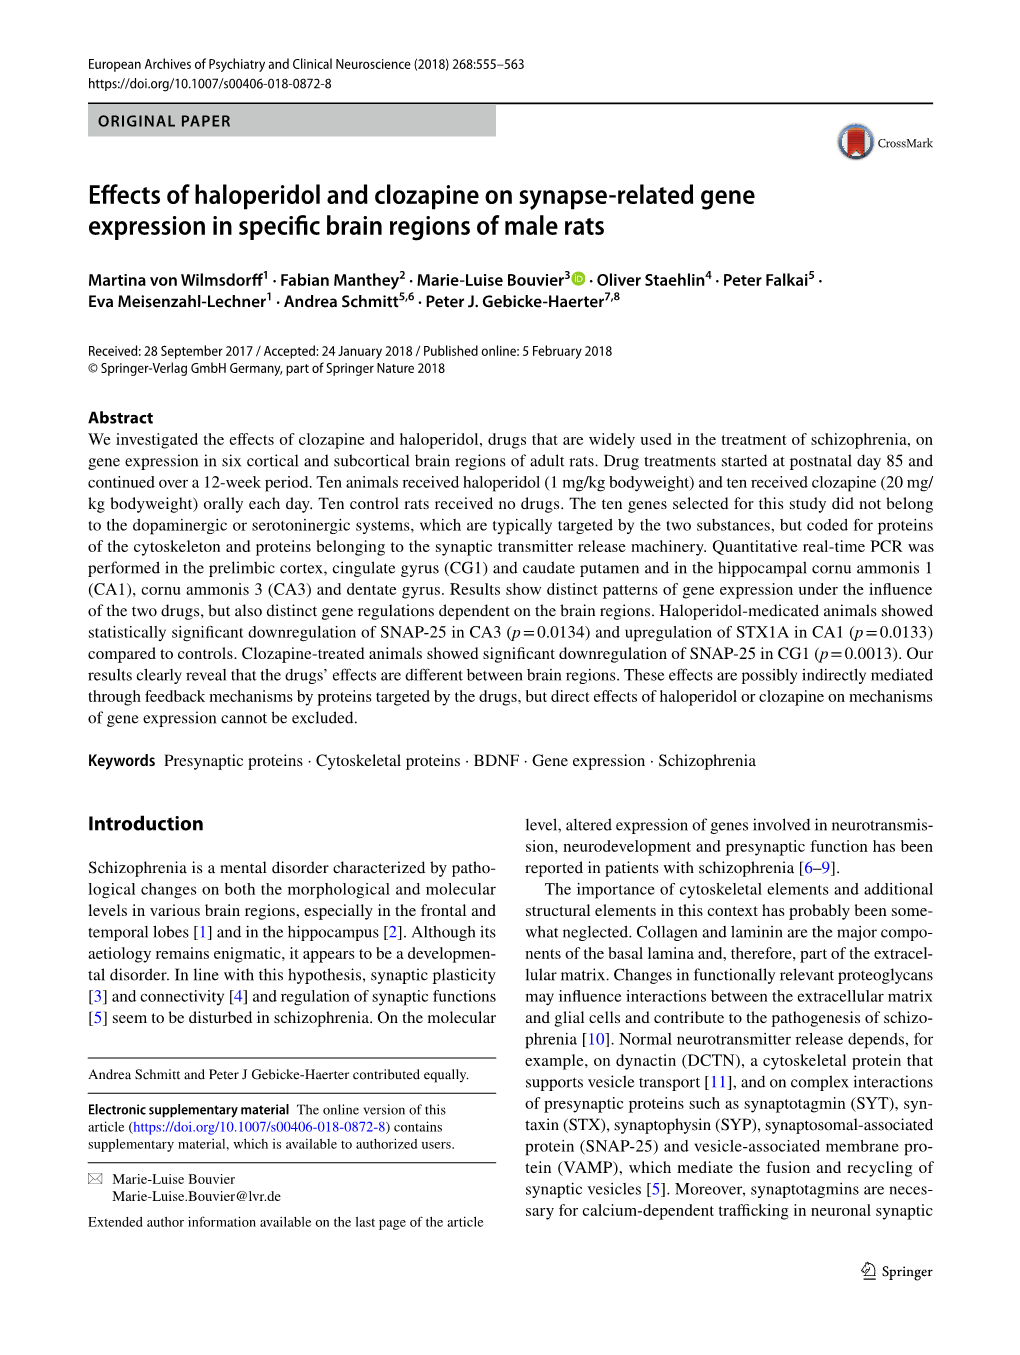 Effects of Haloperidol and Clozapine on Synapse-Related Gene Expression in Specific Brain Regions of Male Rats